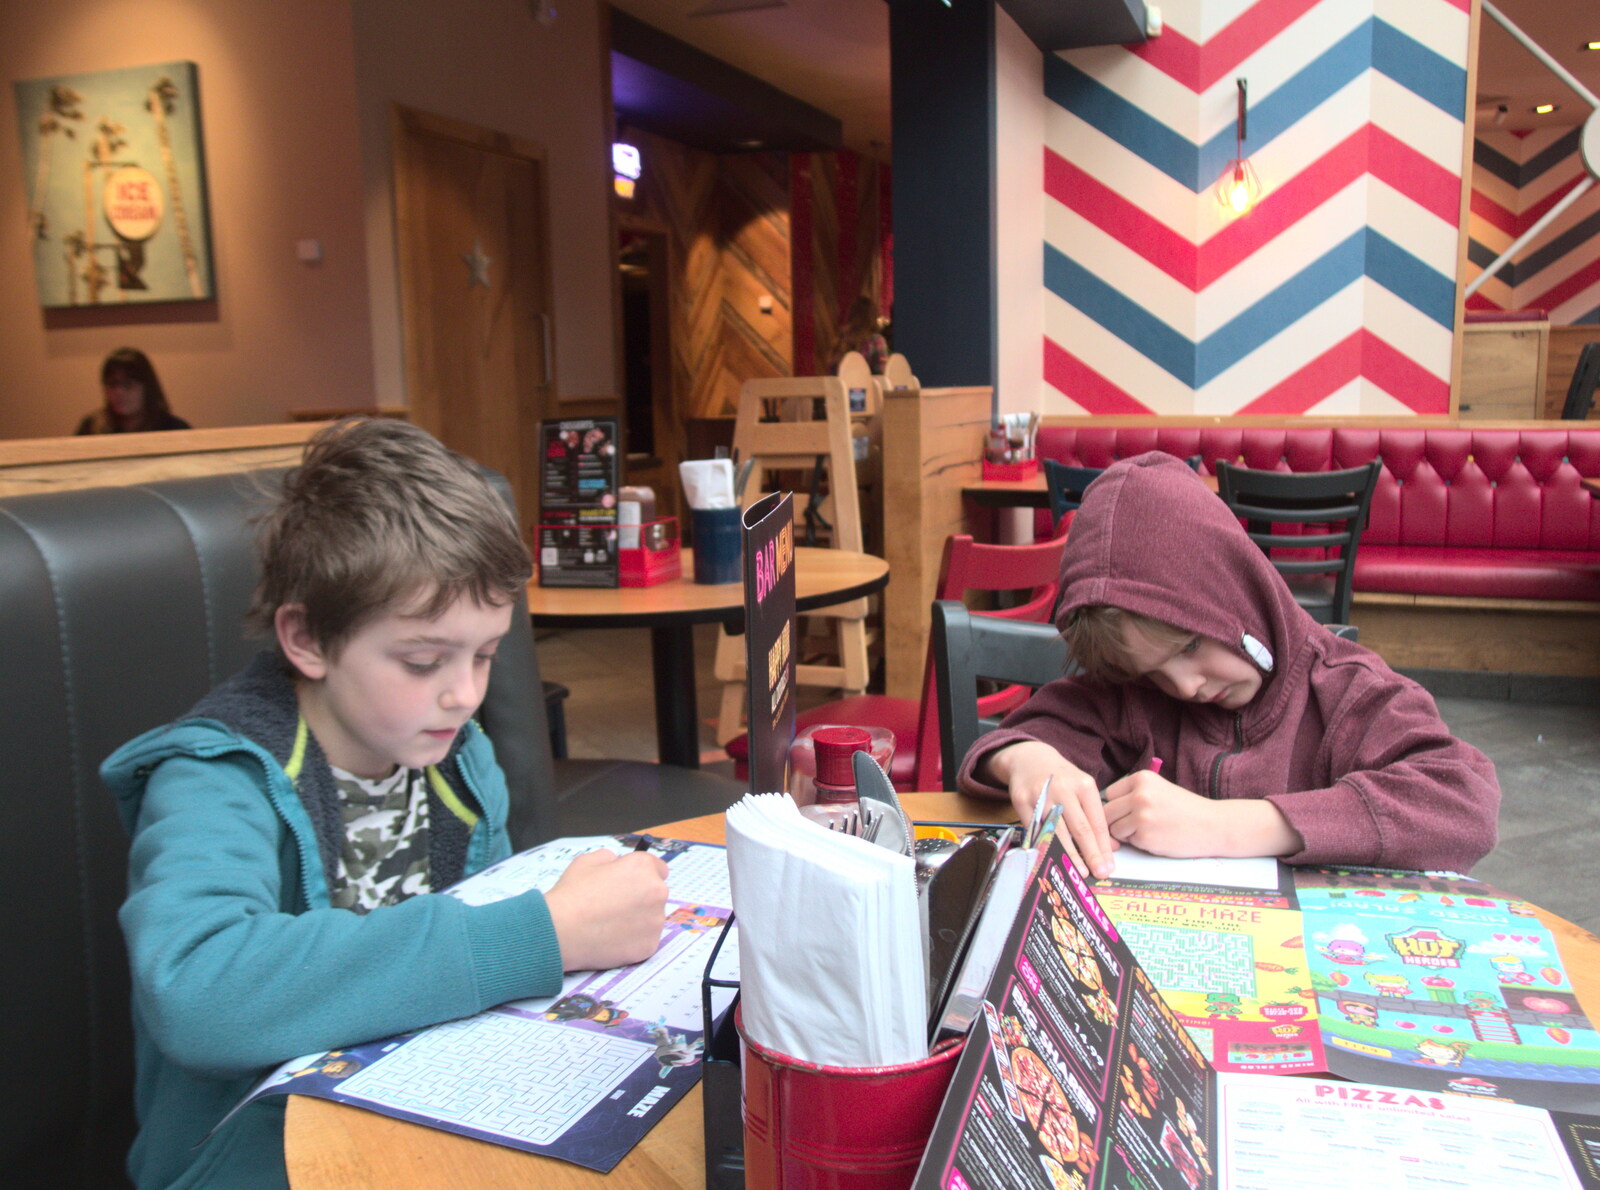 The boys in Pizza Hut from Off to the Cinema Again, Norwich, Norfolk - 9th March 2019